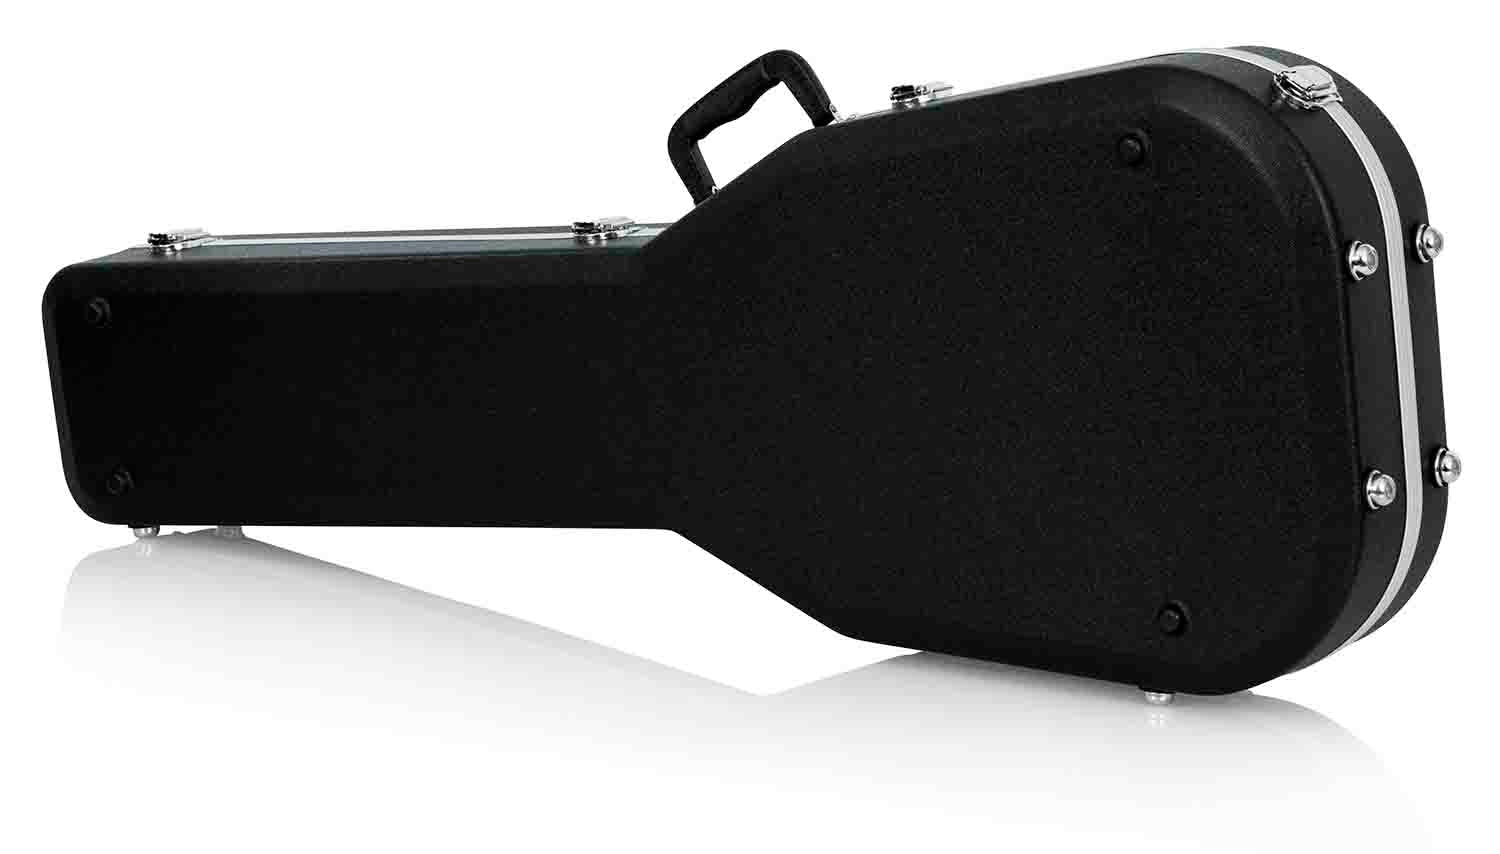 Gator Cases GC-SG Deluxe Molded Guitar Case for Solid-Body Electrics and Gibson SG Guitars - Hollywood DJ